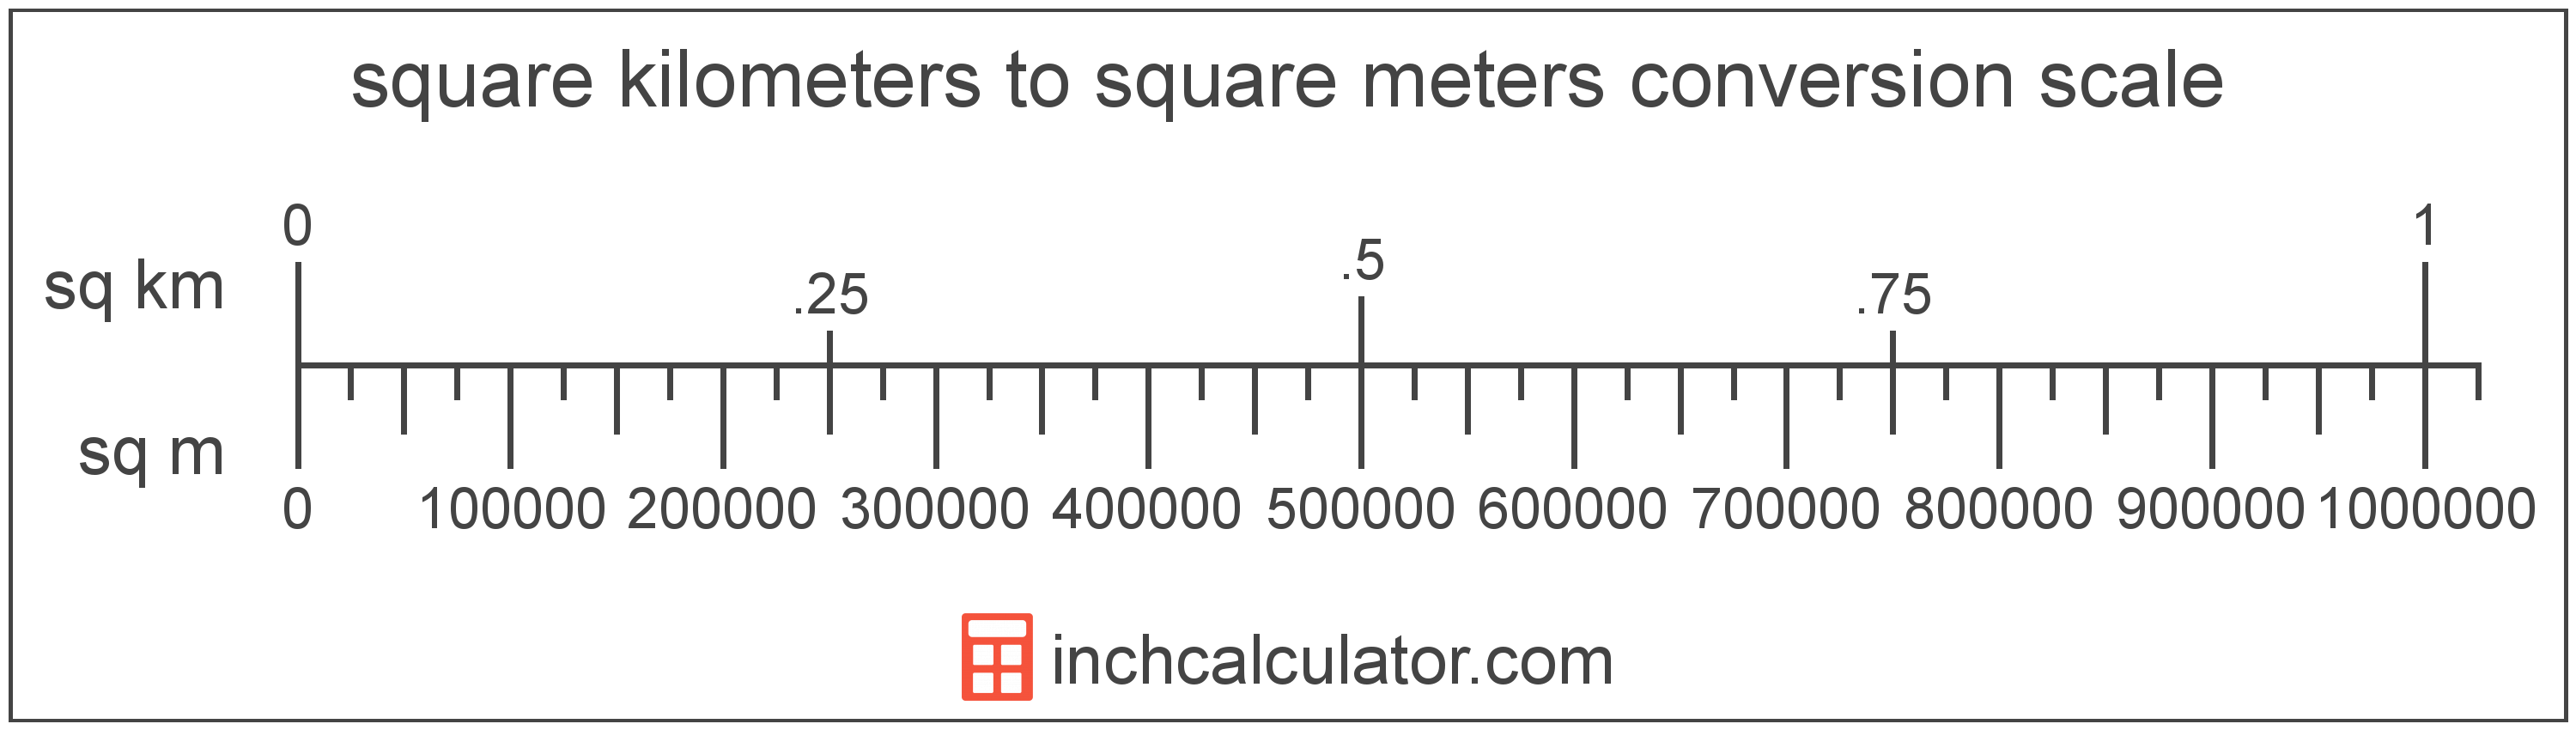 conversion scale showing square kilometers and equivalent square meters area values